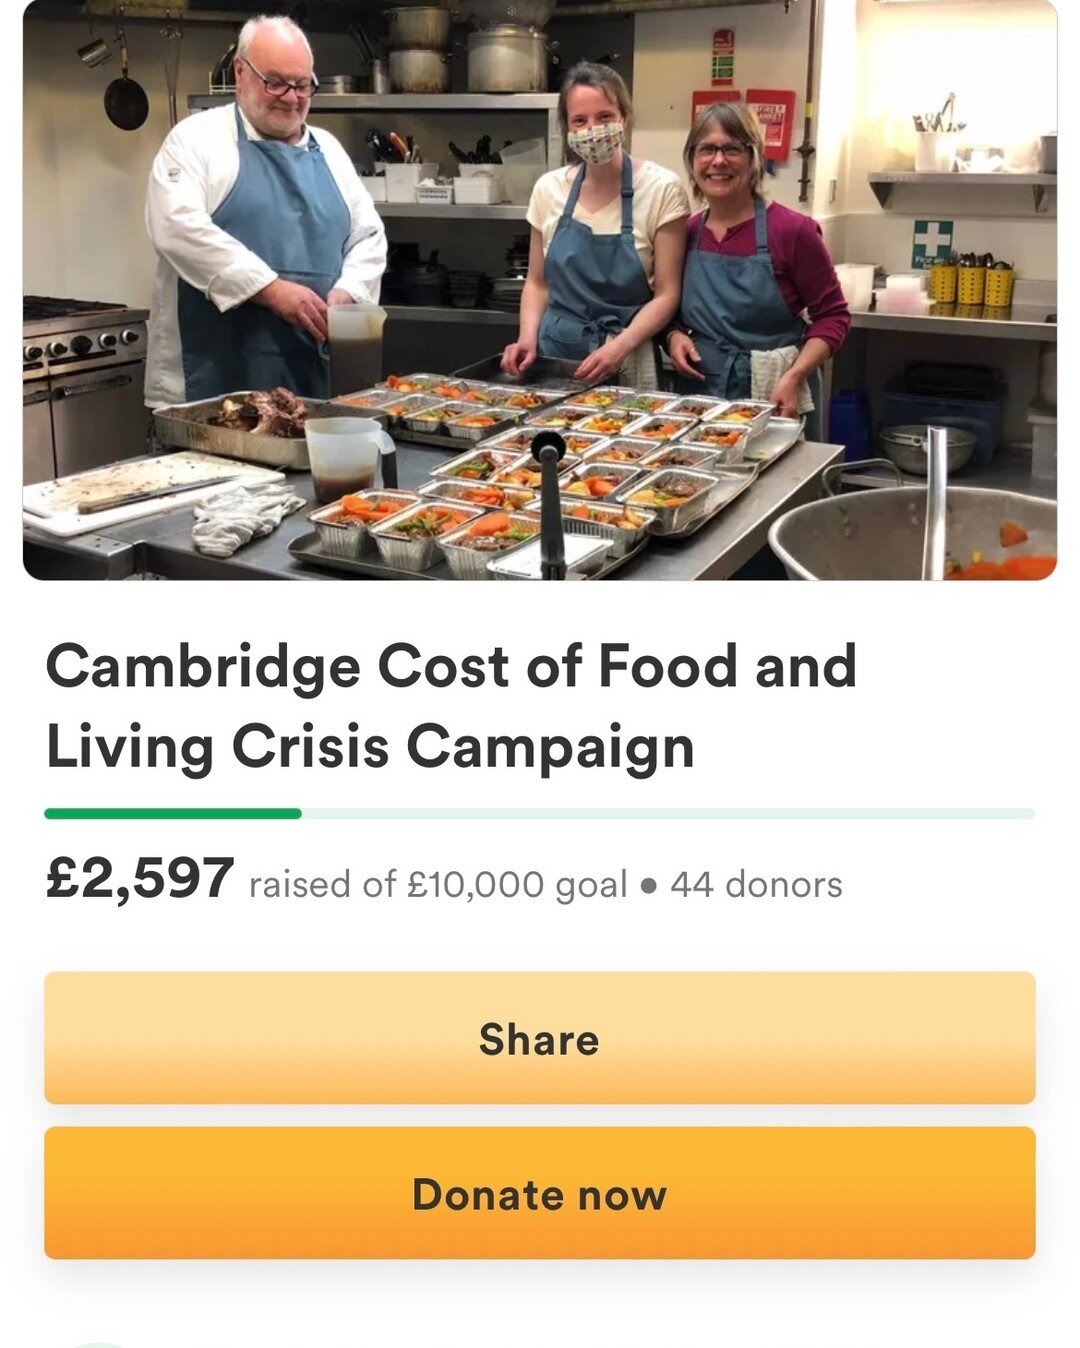 🍴Cambridge Cost of Food and Living Crisis Fund🍴
 
We&rsquo;ve hit &pound;2500!

A heartfelt thank you to everyone who has donated, shared, liked or commented on our fundraiser so far 🙏 ❤️ 👏 This wouldn&rsquo;t have been possible without the suppo